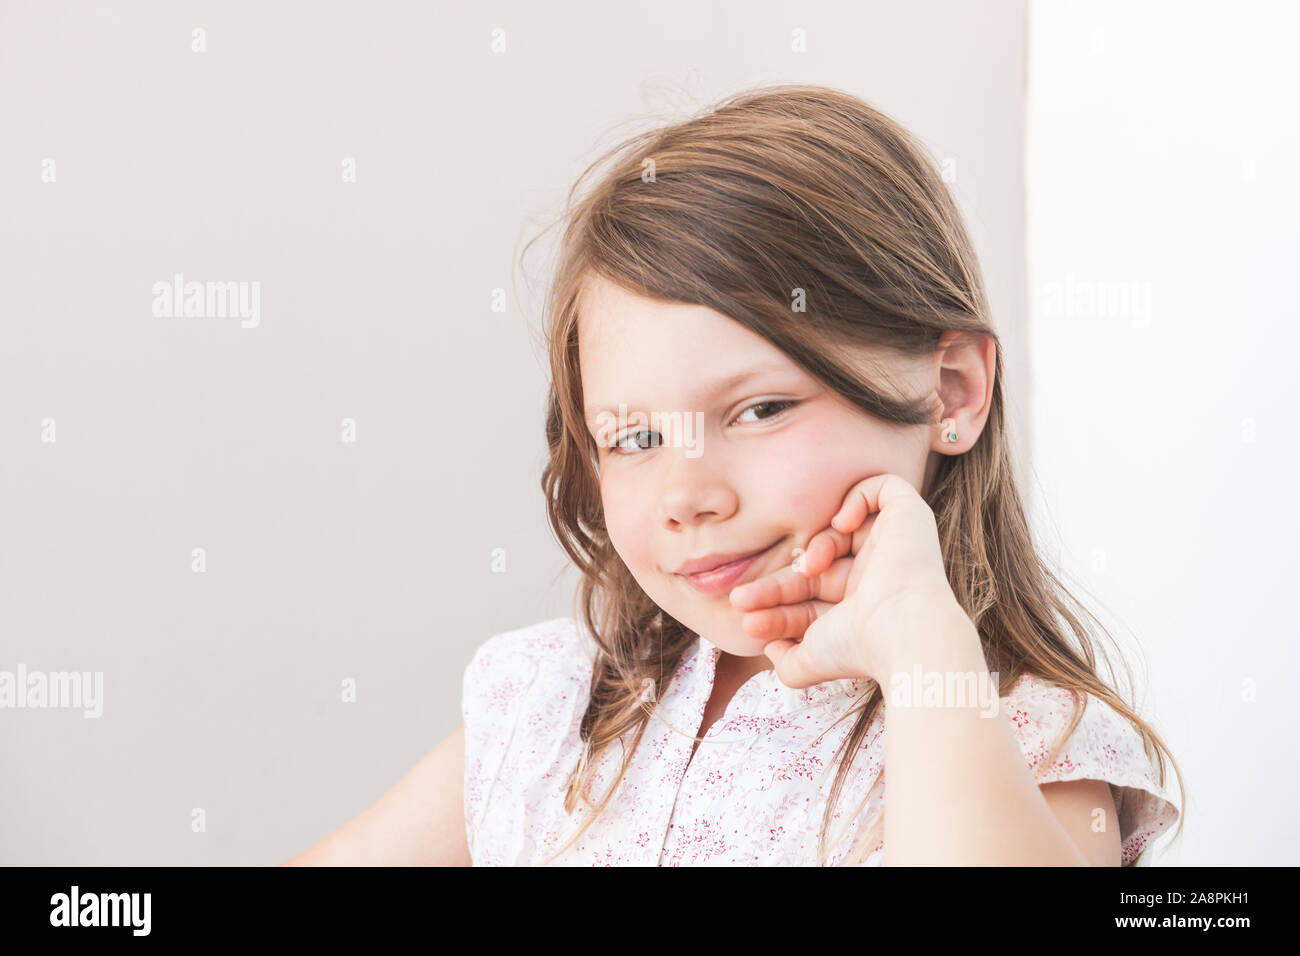 Smiling little Caucasian girl, close-up face portrait over gray wall background Stock Photo